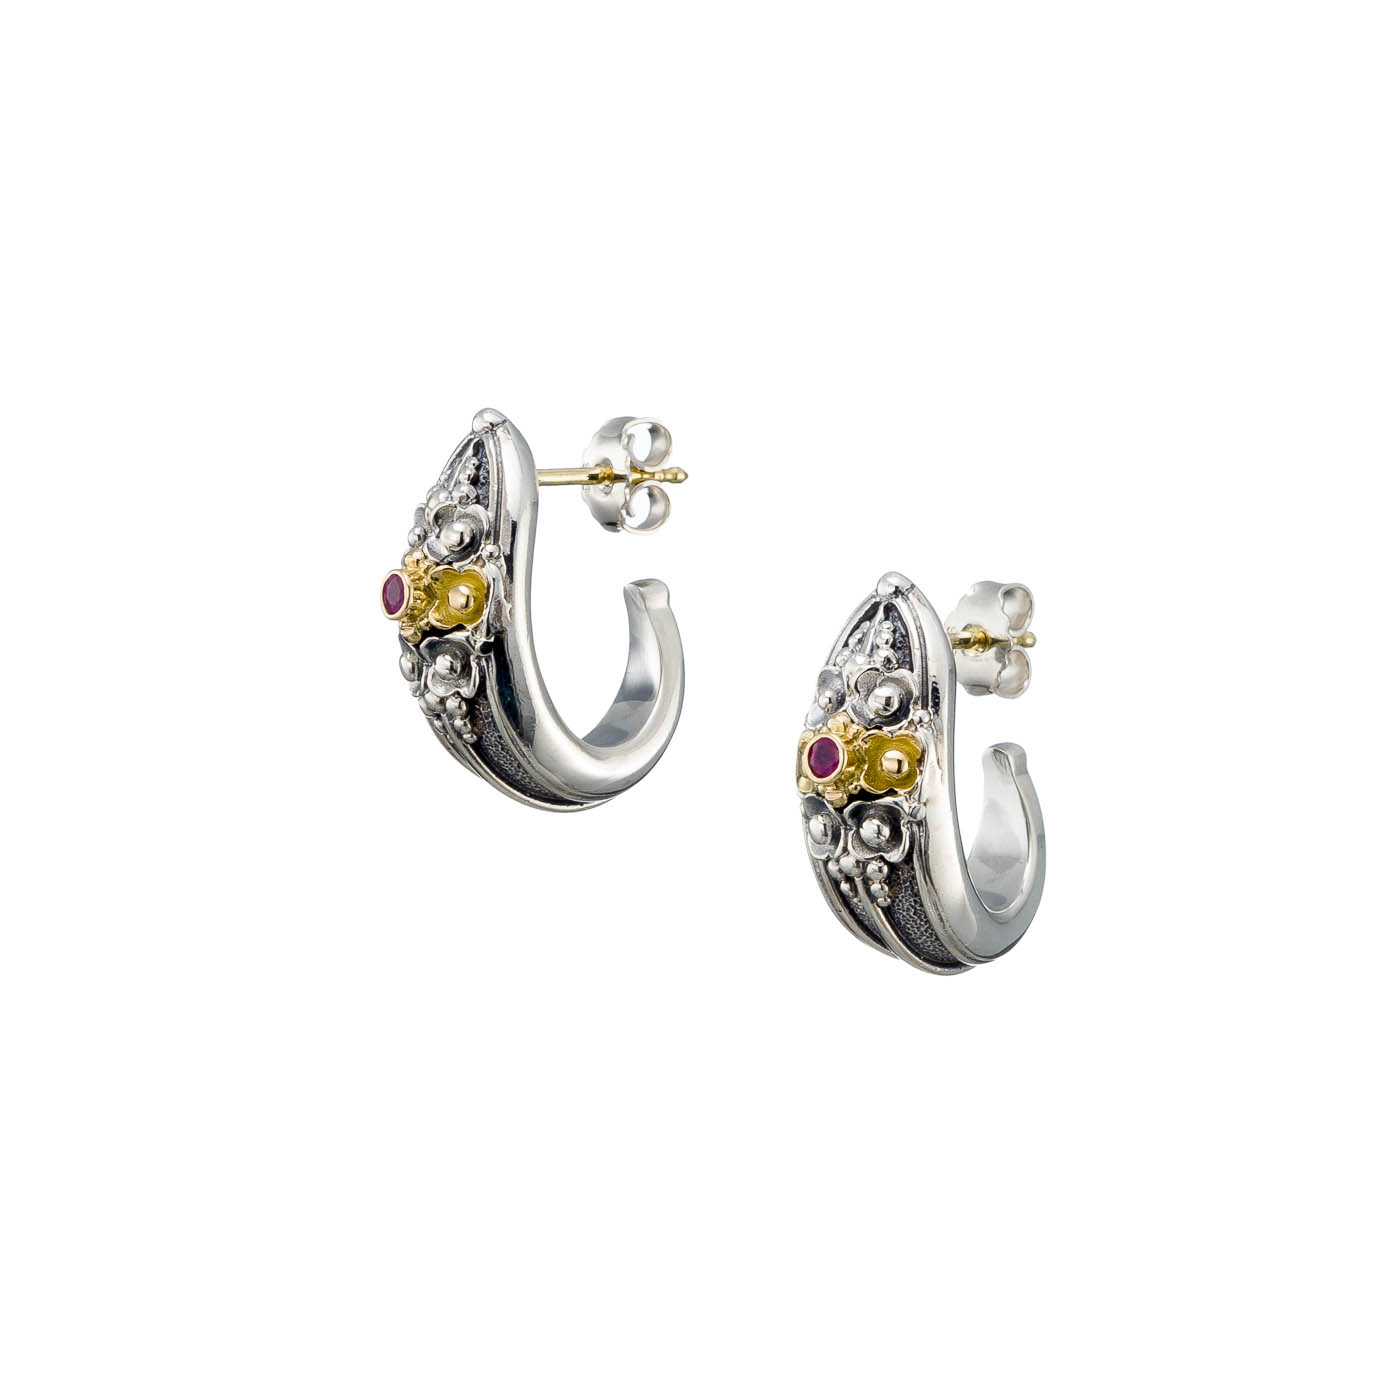 Kassandra half hoops Earrings in 18K Gold and Sterling Silver with Ruby